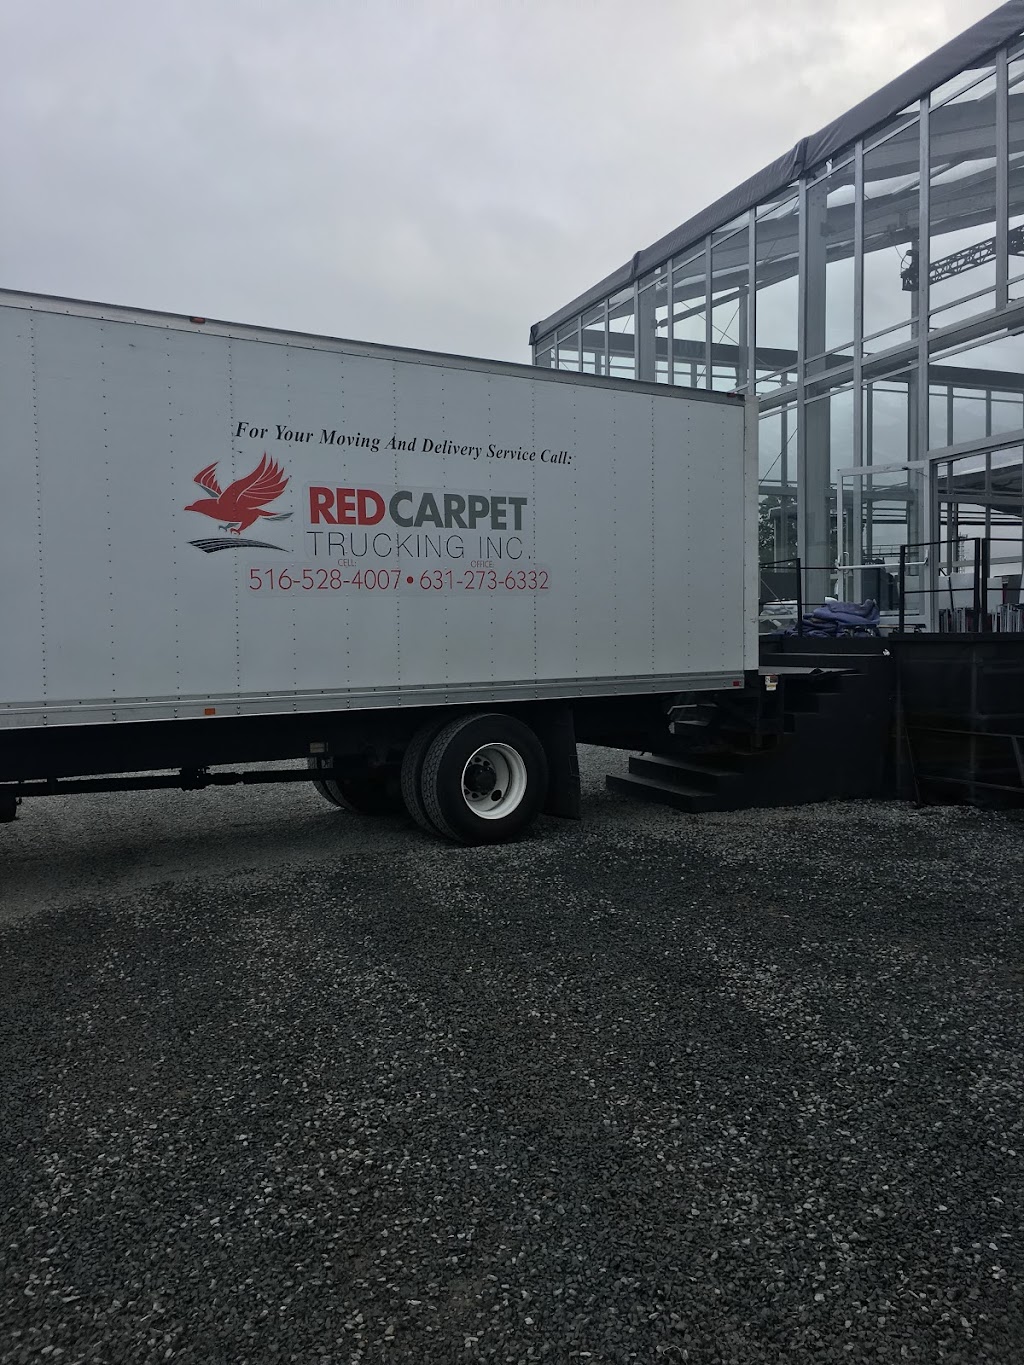 Red Carpet Trucking | 41 Helmig St, Brentwood, NY 11717 | Phone: (631) 273-6332